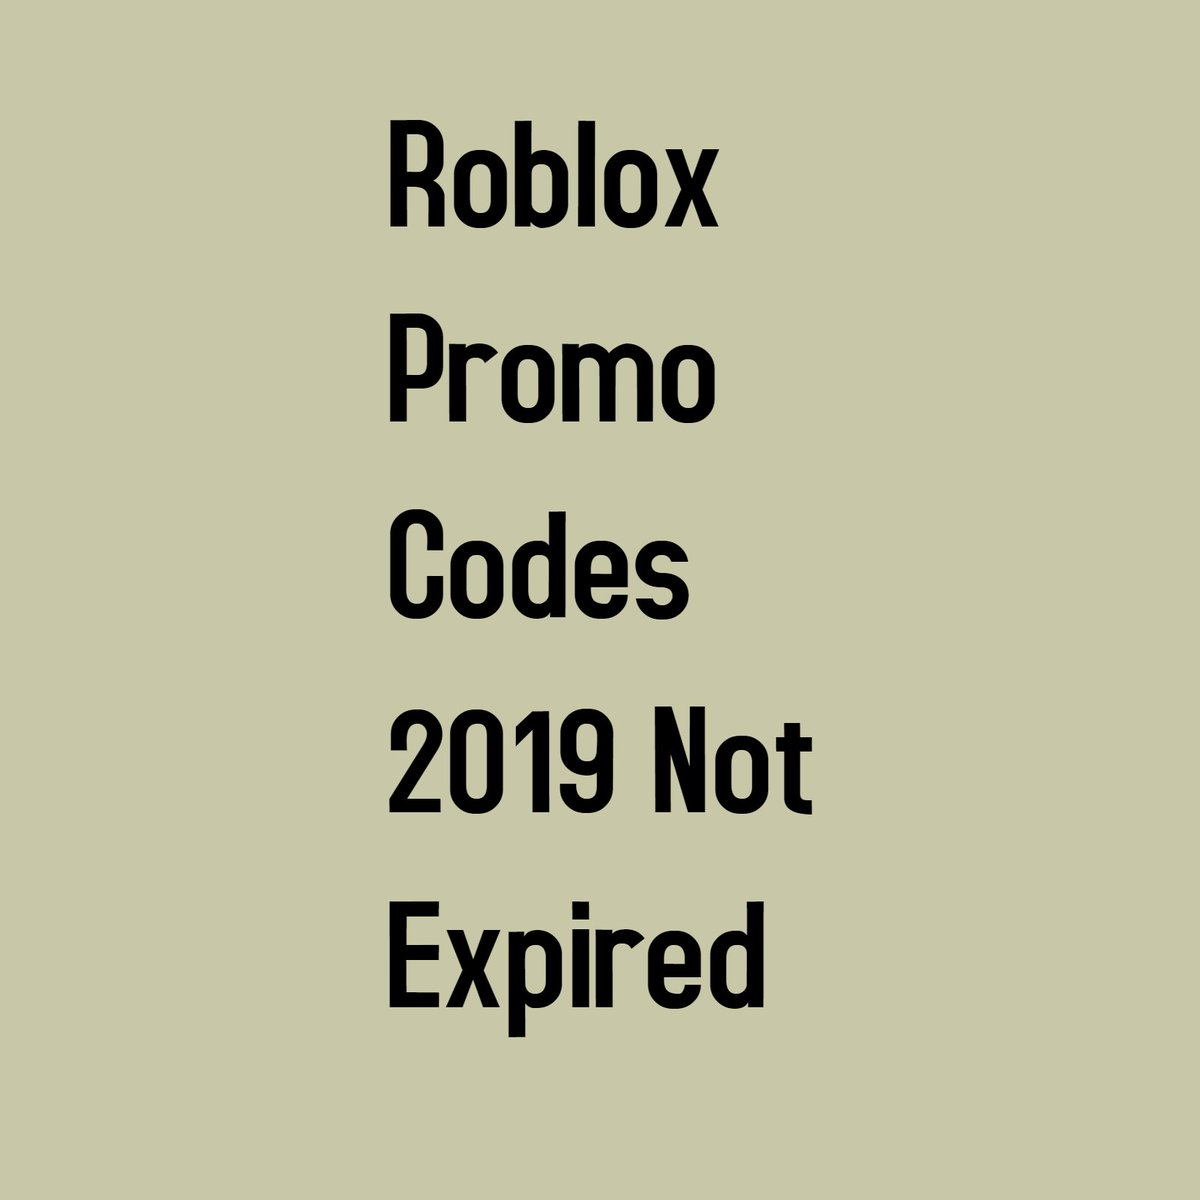 Roblox Promo Codes On Twitter 100 Working Roblox Promo Codes